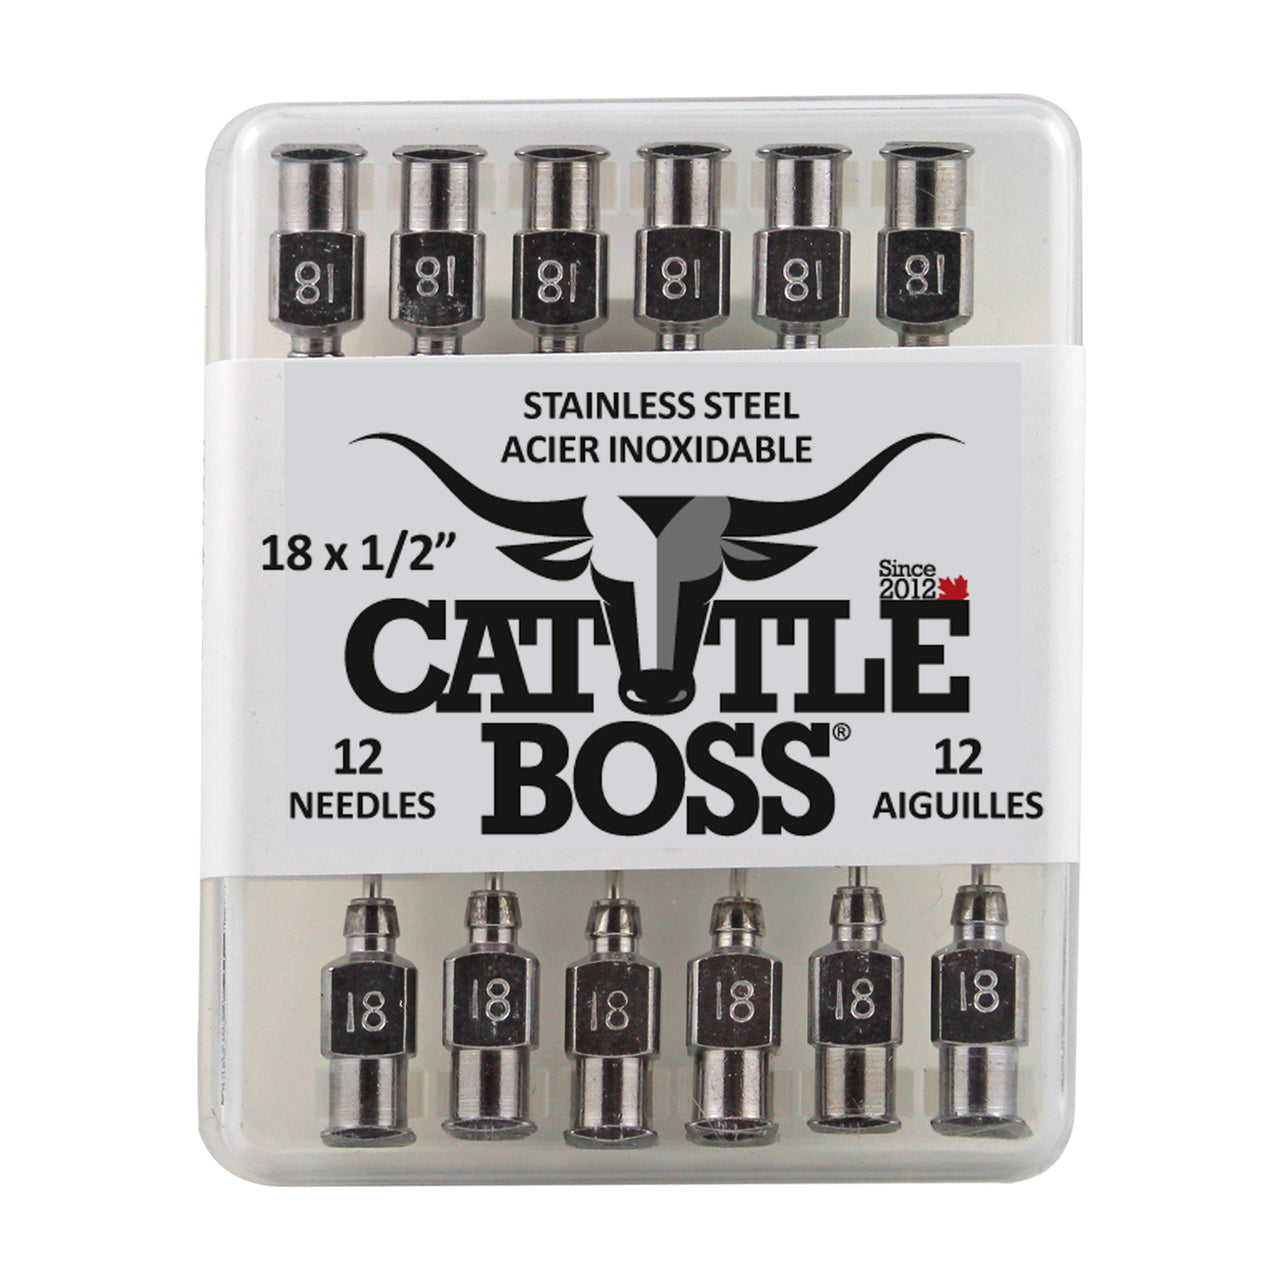 Cattle Boss Stainless Steel Hub Needle (12 Pack) 18X1/2 - Drug Administration Cattle Boss - Canada